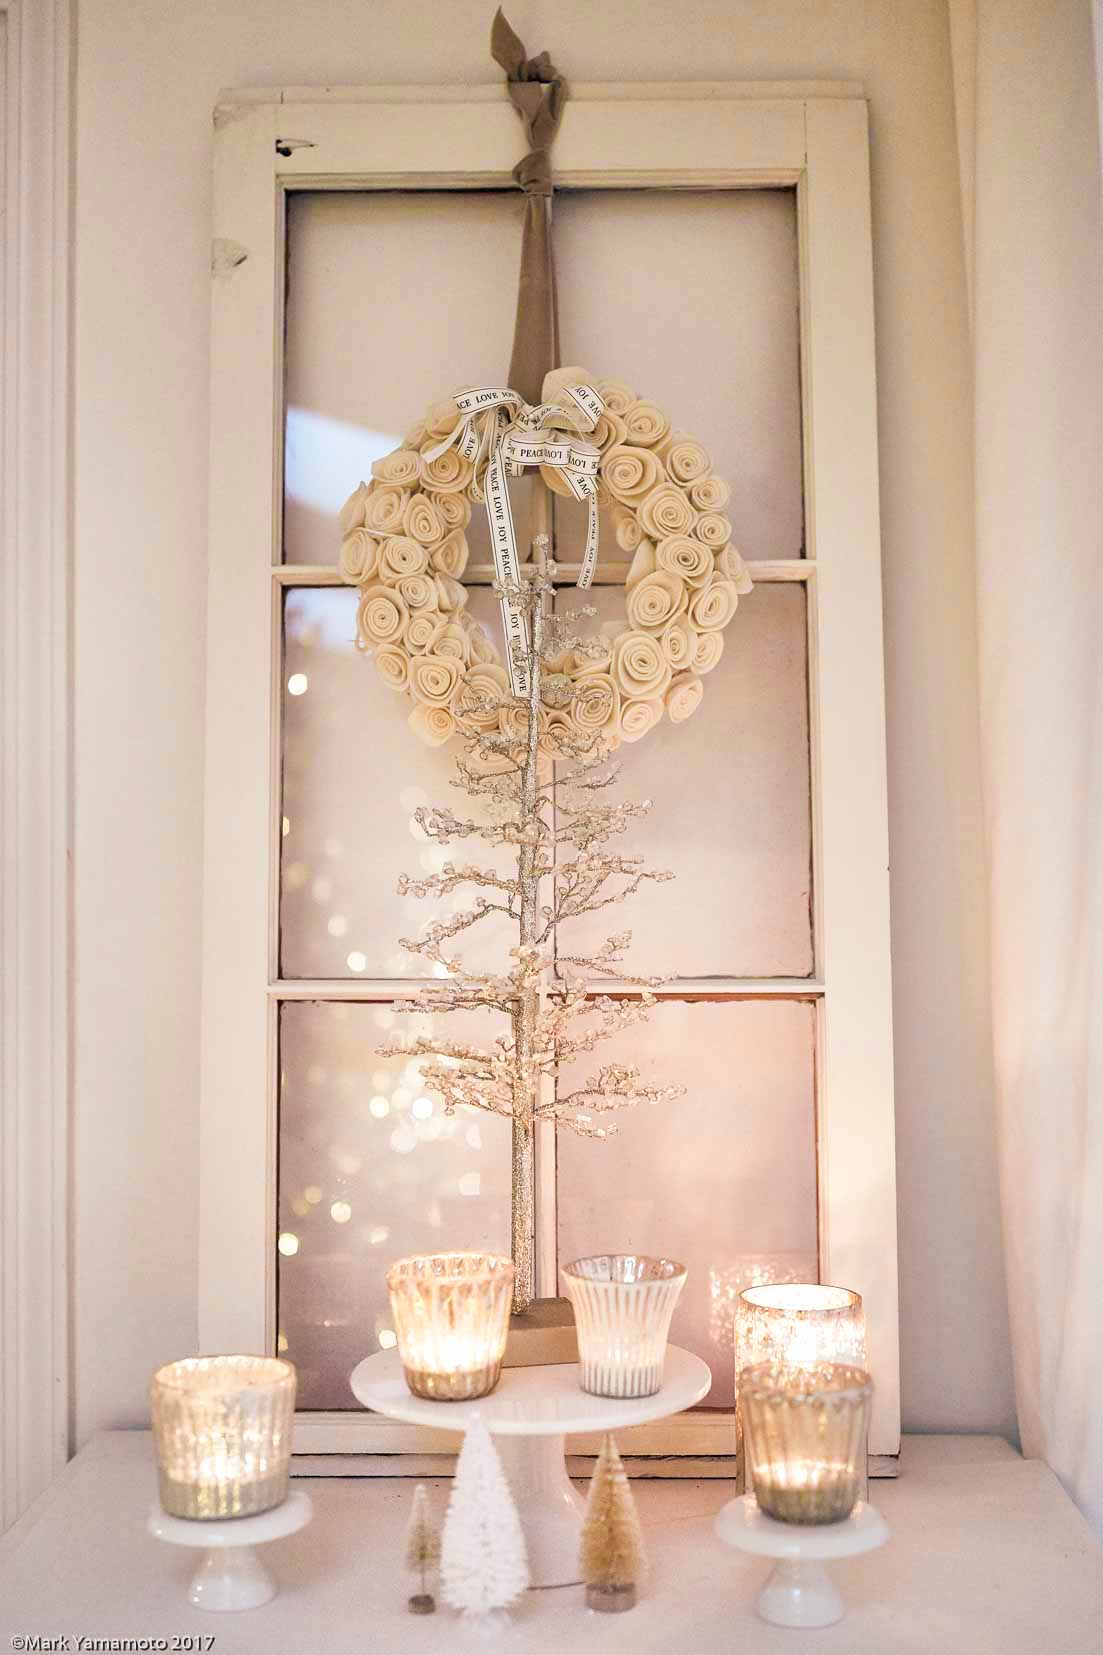 This Christmas night tour is full of beautiful inspiration. If you want some Christmas ideas for your dining room, living room, and bedroom then make sure to check out this post. Also, you'll find a pretty outdoor dining table! #christmas #christmastour #holidaydecor